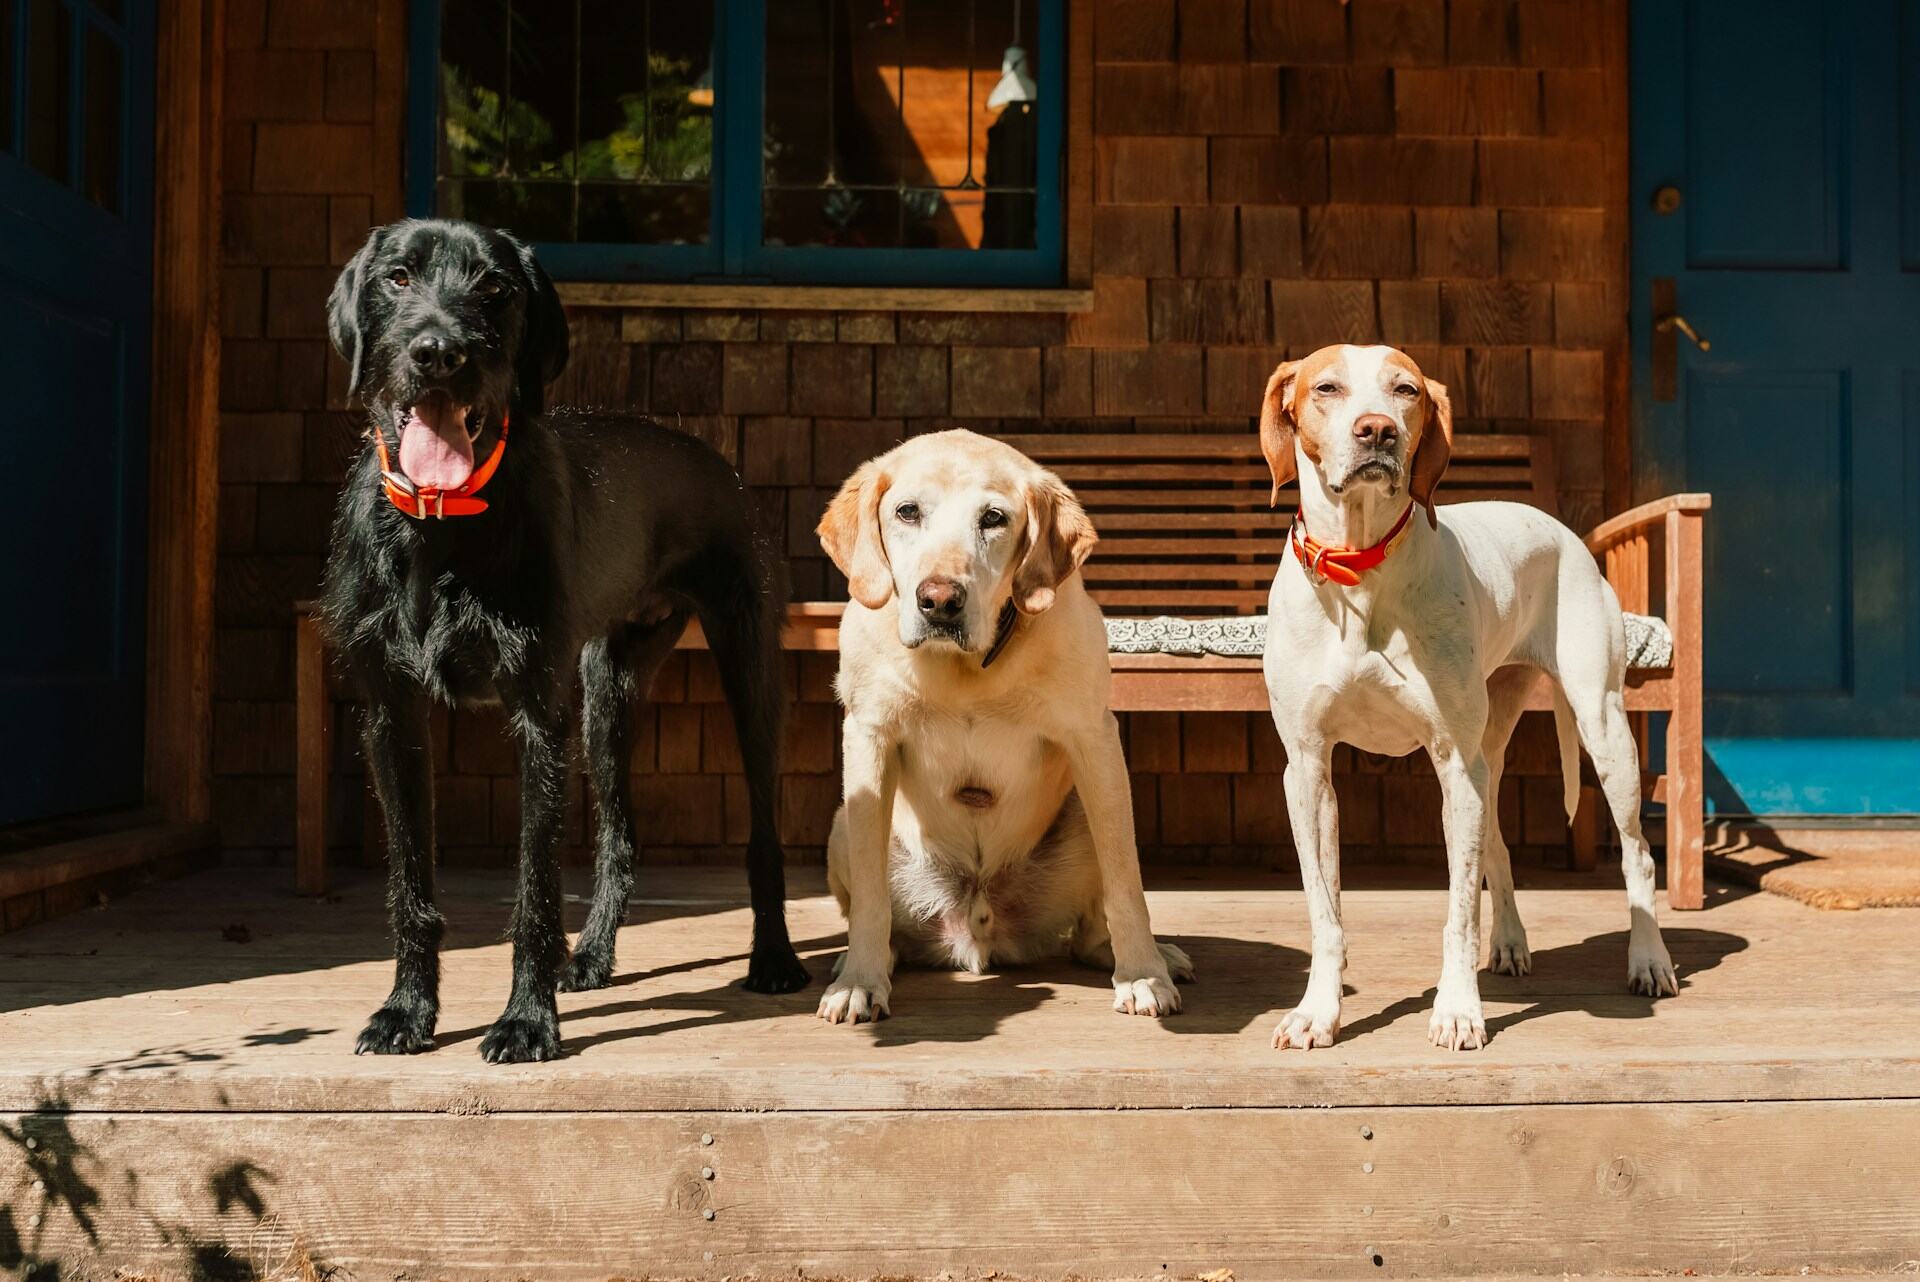 A group of dogs sitting on a sunny porch outside a house